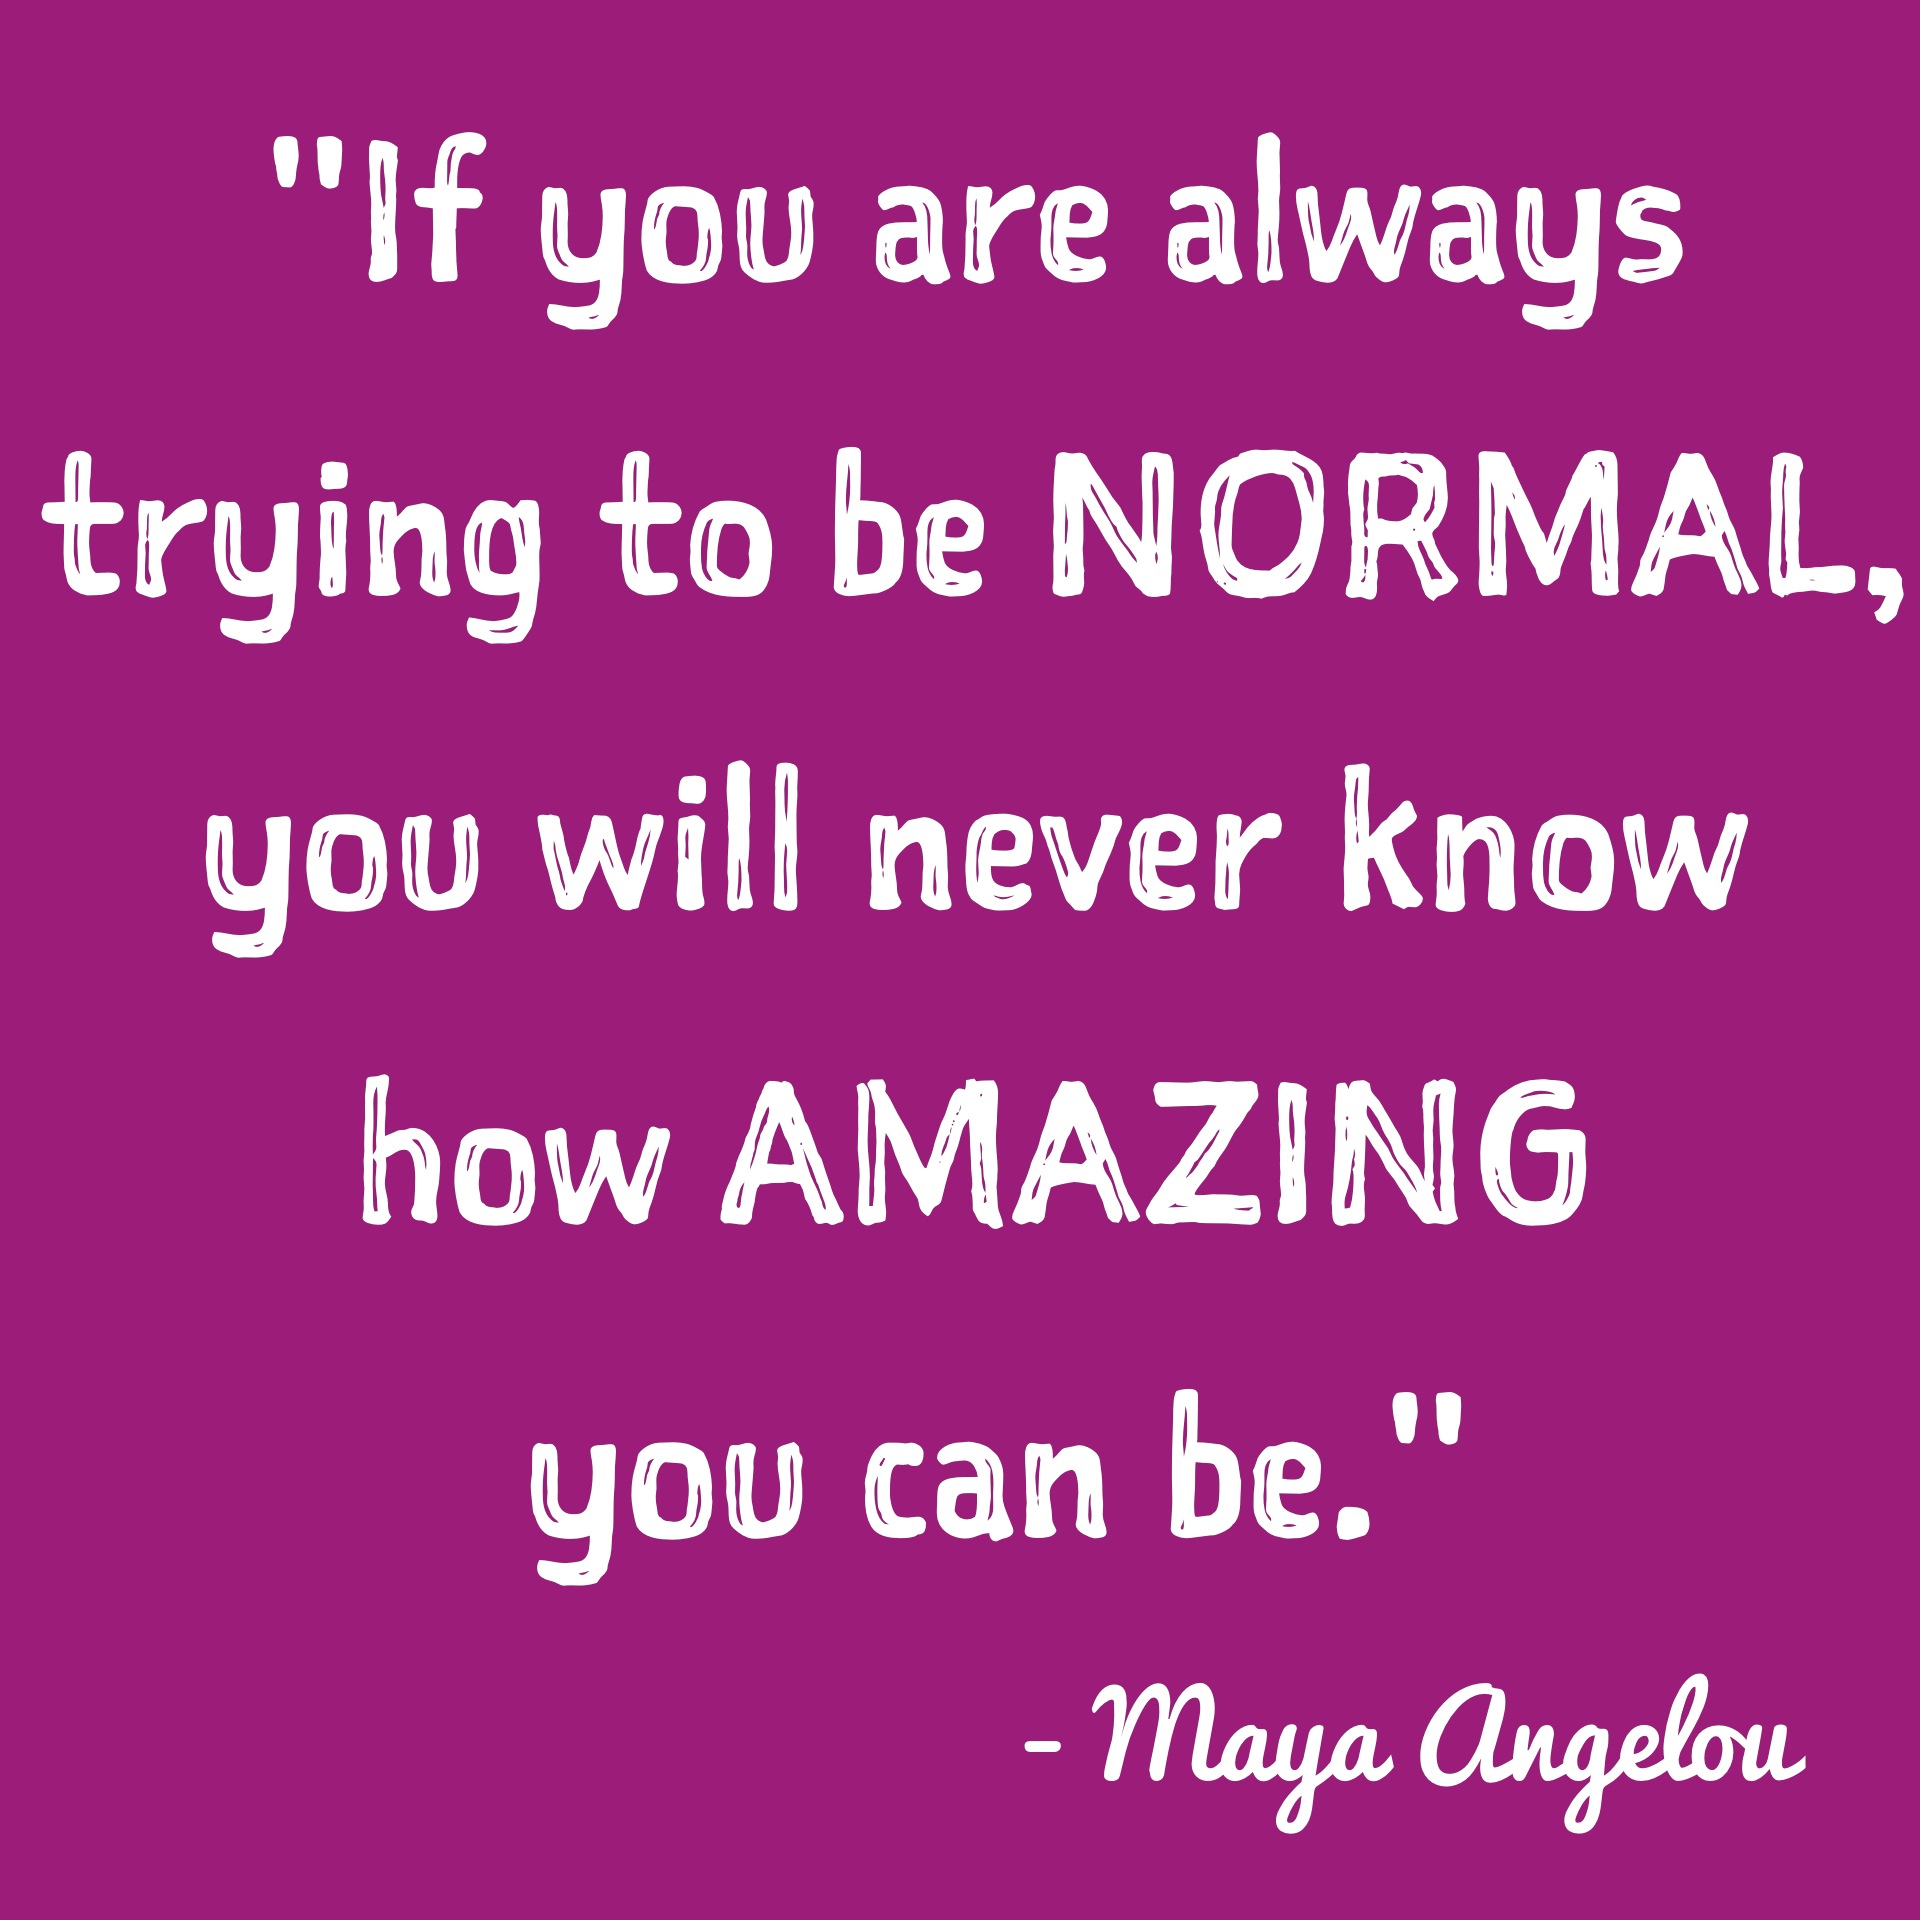 inspirational-quotes-inspiring-quotes-potential-quotes-inner-voice-quotes-if-you-are-always-trying-to-be-normal-you-will-never-know-how-amazing-you-can-be.